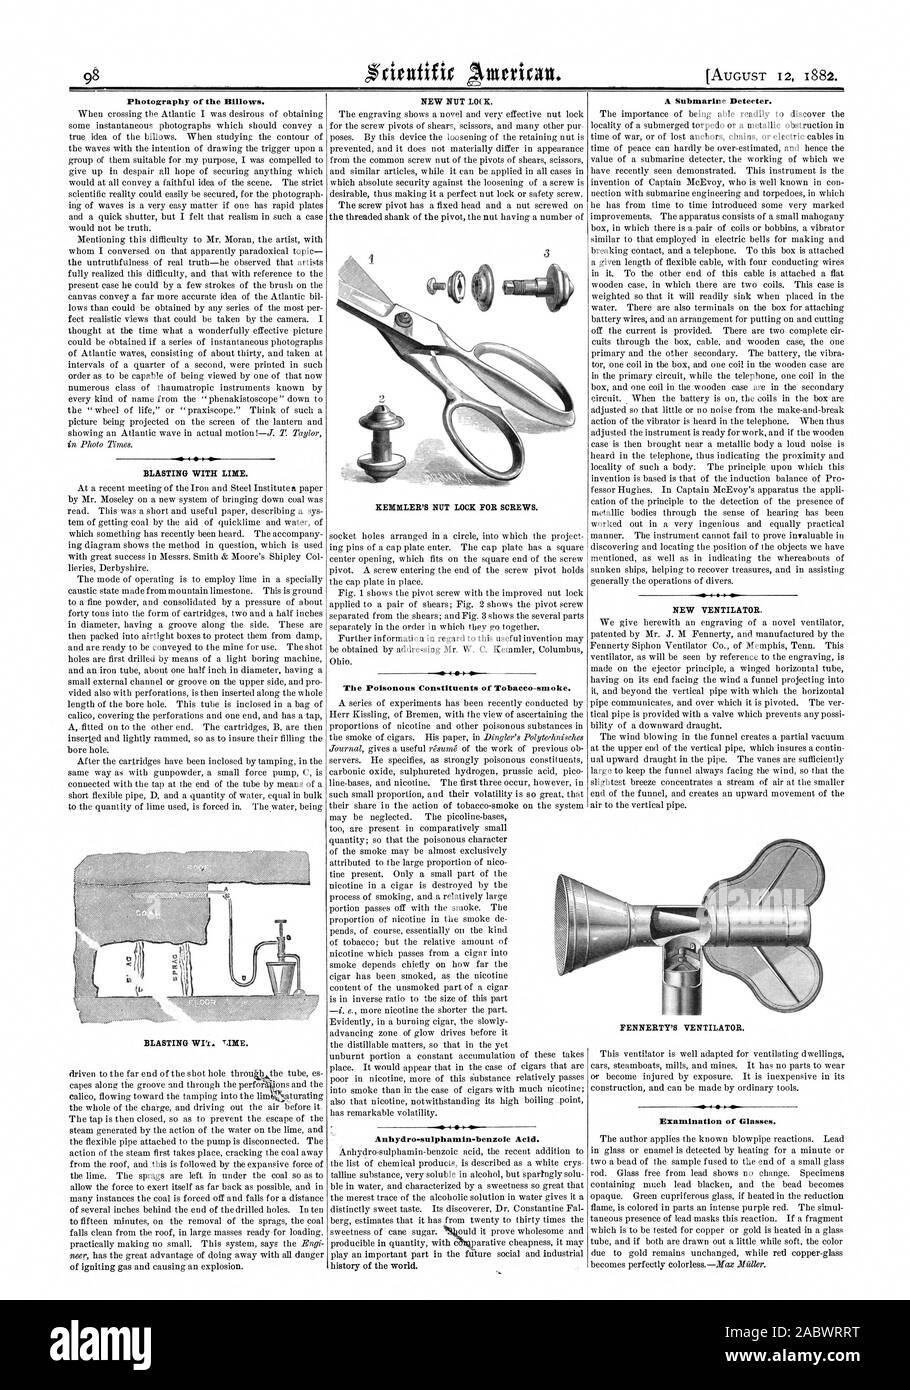 Photography of the Billows. The Poisonous Constituents of Tobacco-smoke. Anhydro-sulphamin-benzoic Acid. A Submarine Deteeter. 4  Examination of Glasses., scientific american, 1882-08-12 Stock Photo